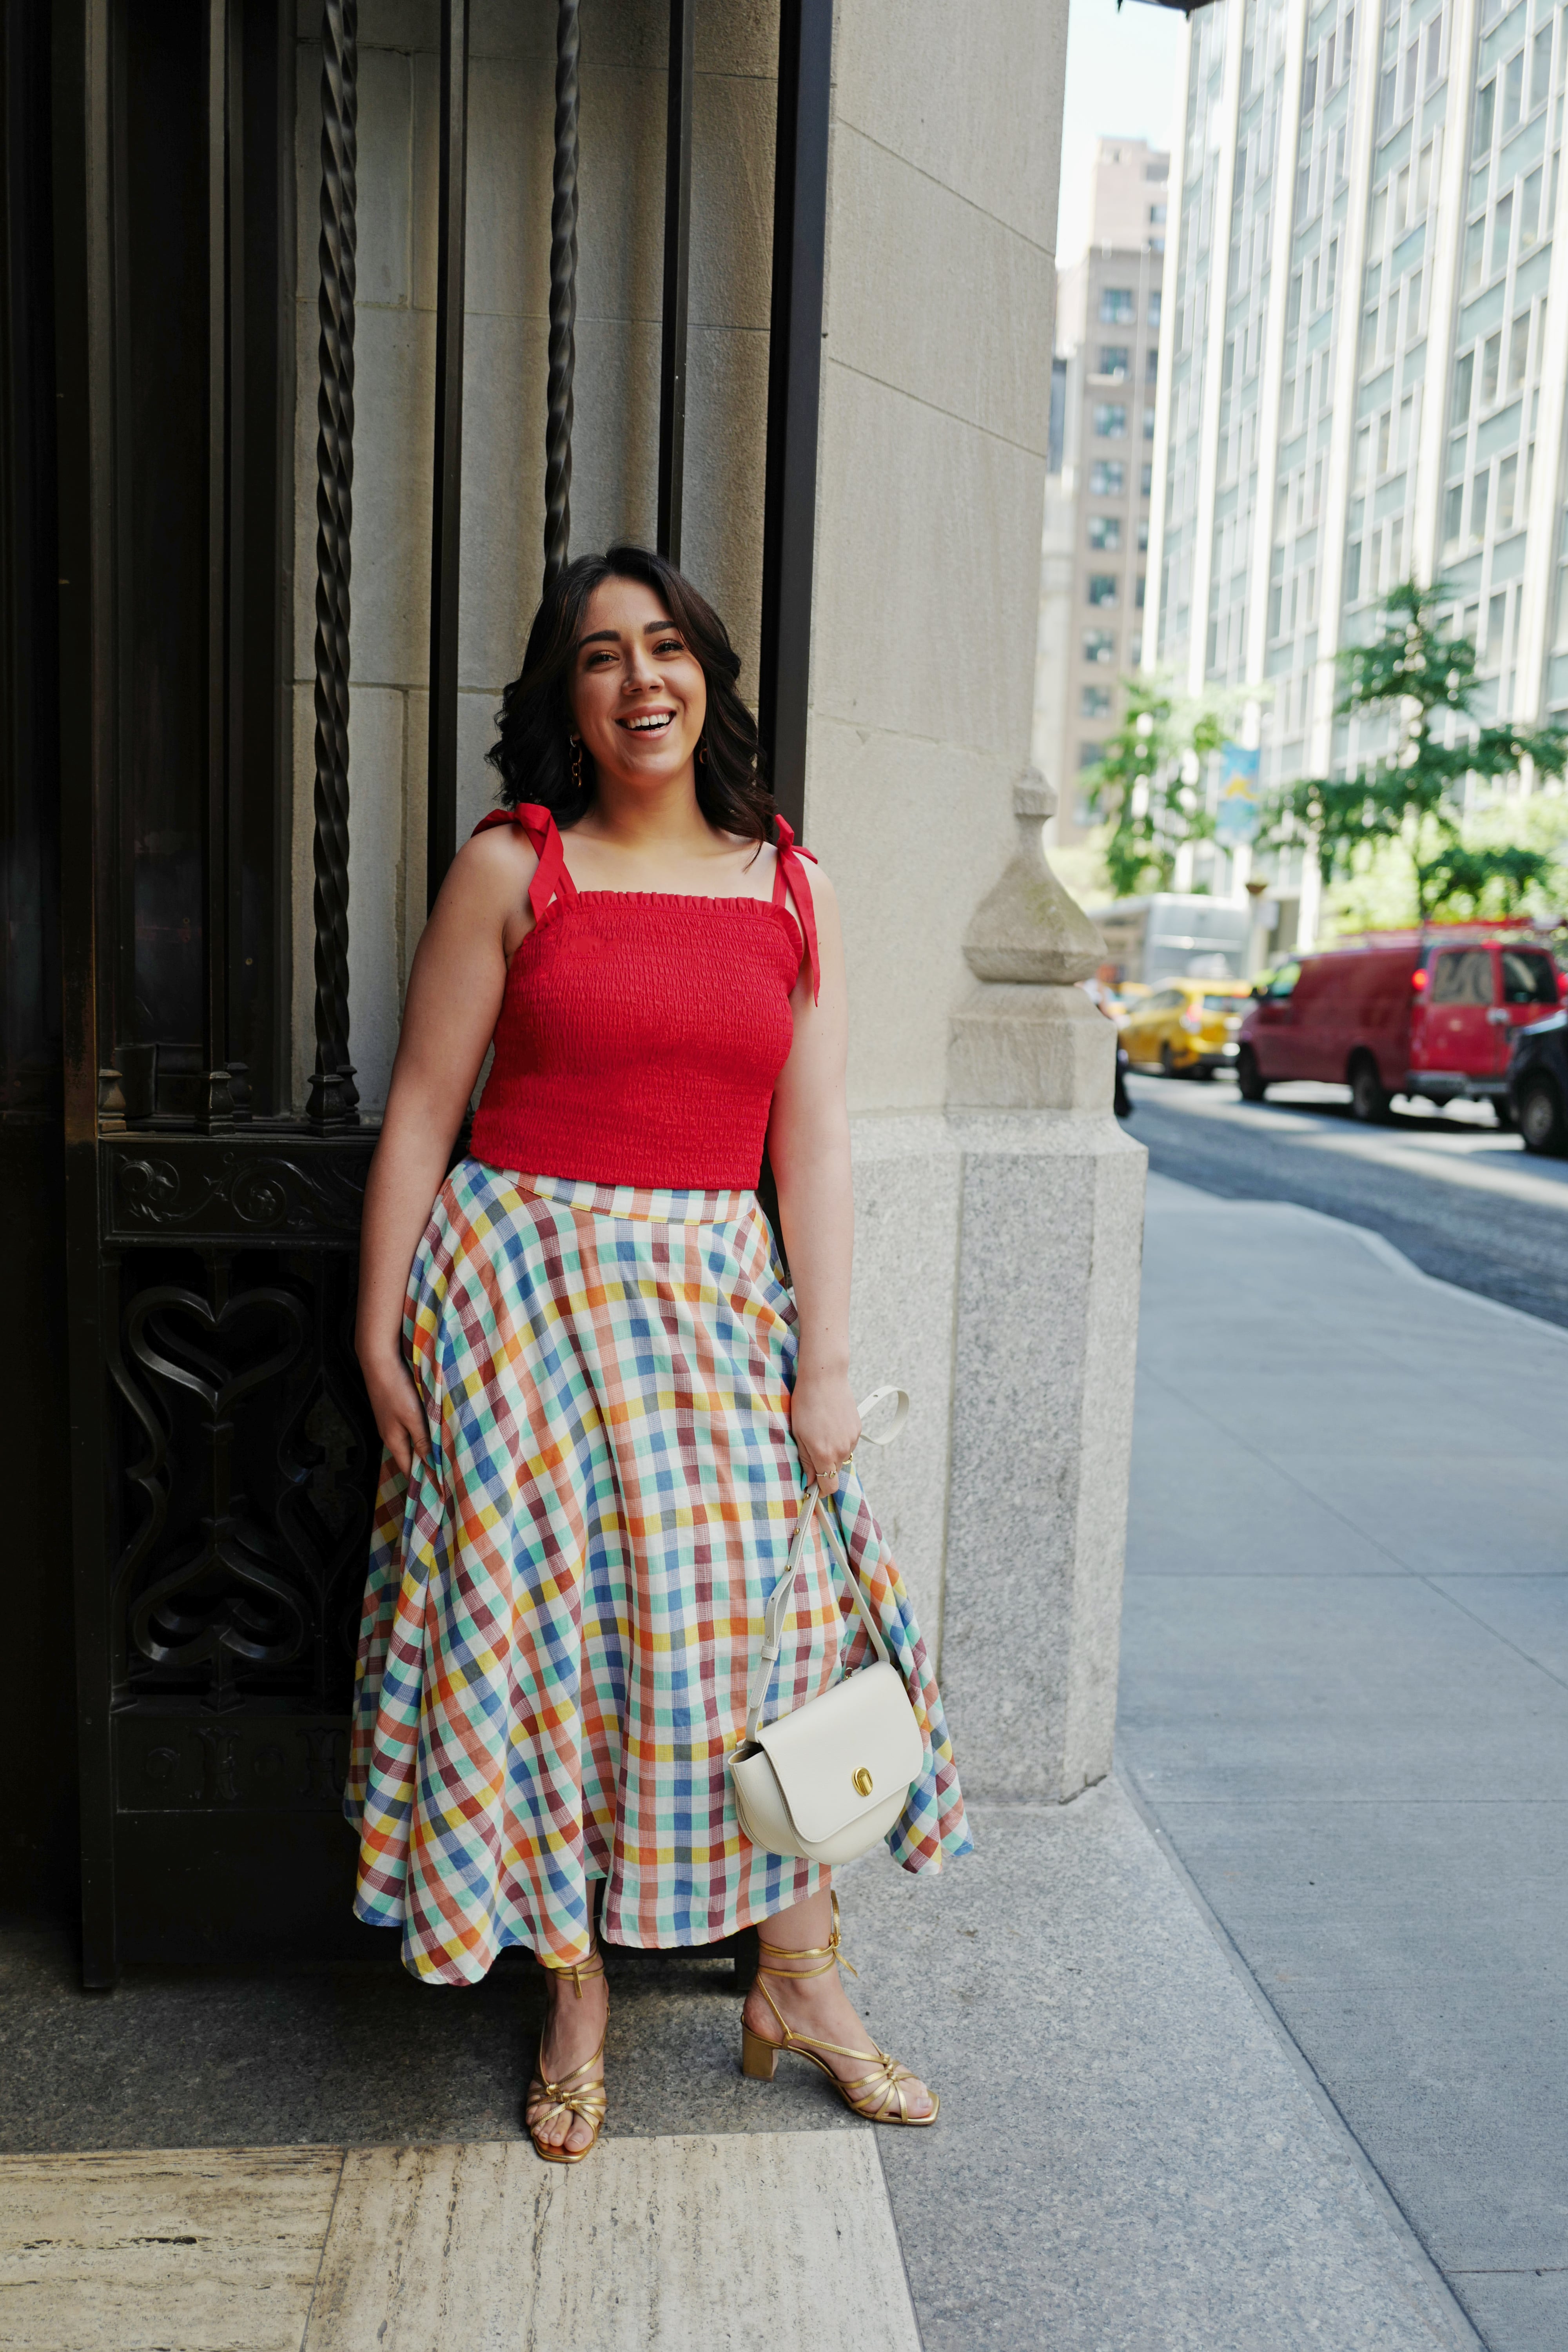 Honest Curvy Girl's Quince Clothing Review: How This Brand Fits